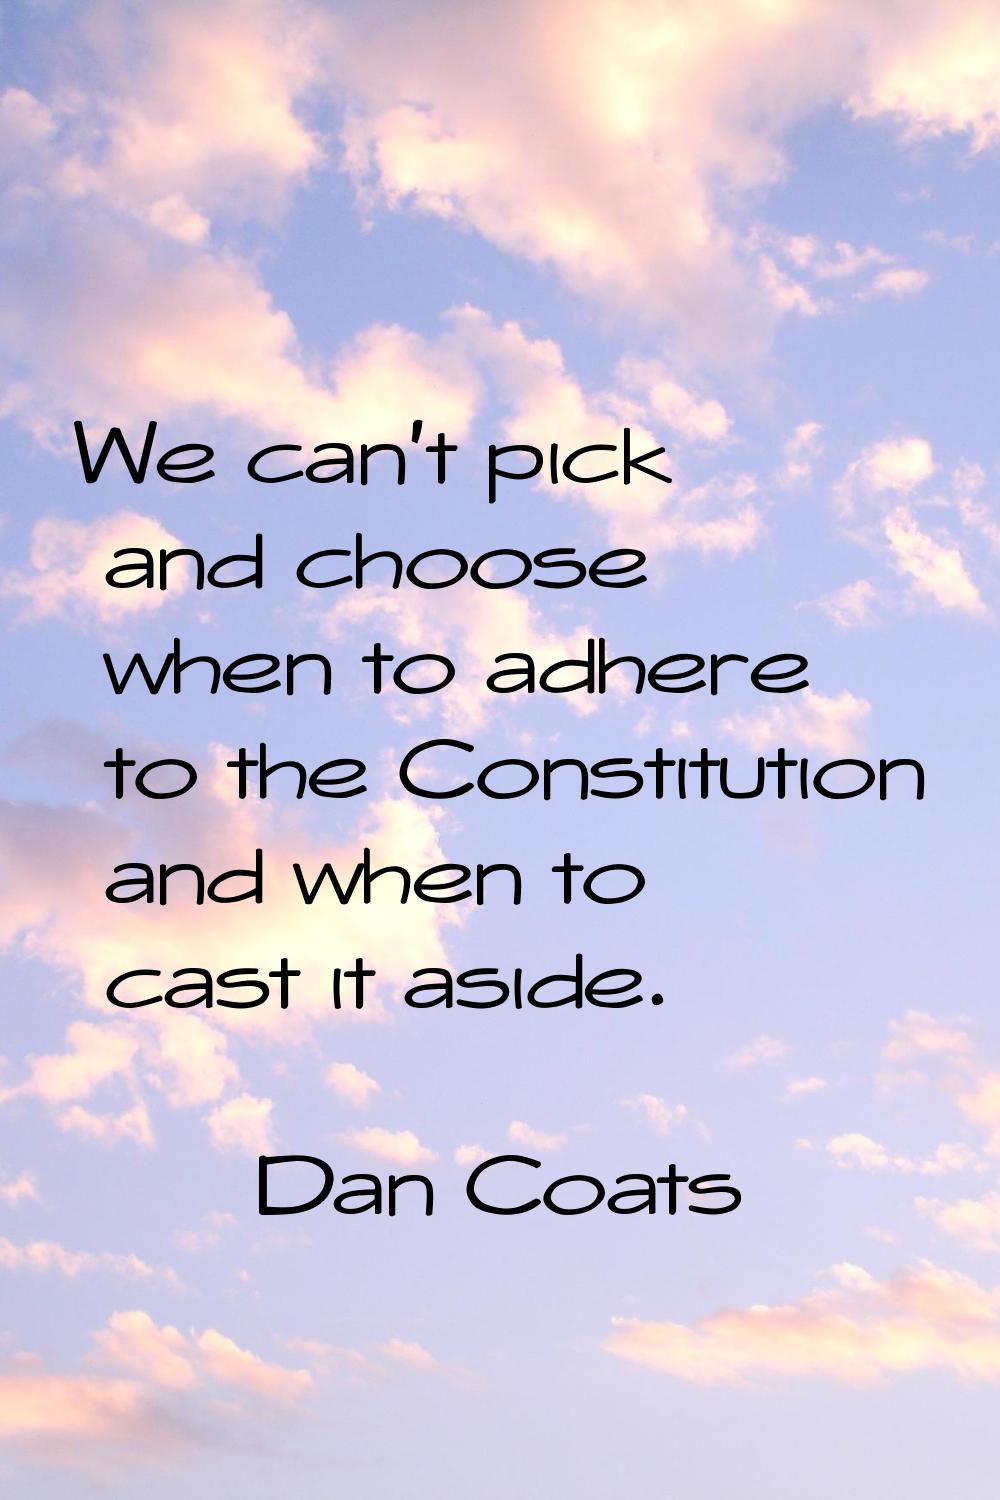 We can't pick and choose when to adhere to the Constitution and when to cast it aside.